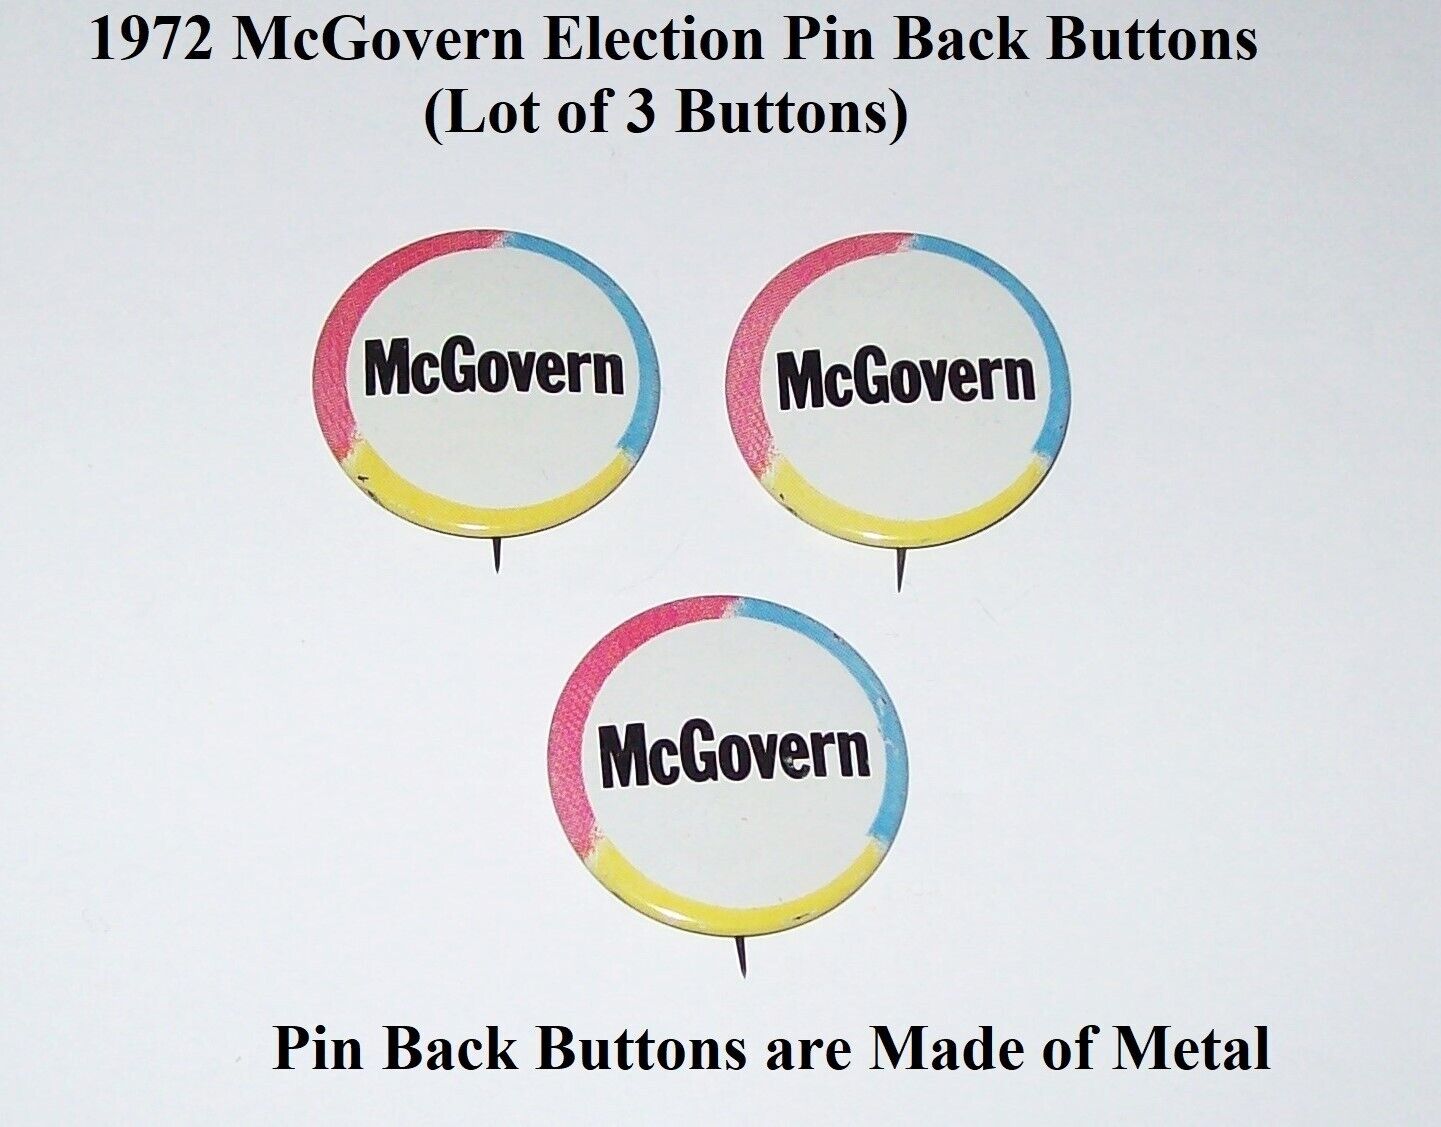 George McGovern 1972 Election Pin Back Buttons ( Lot of 3 Buttons)